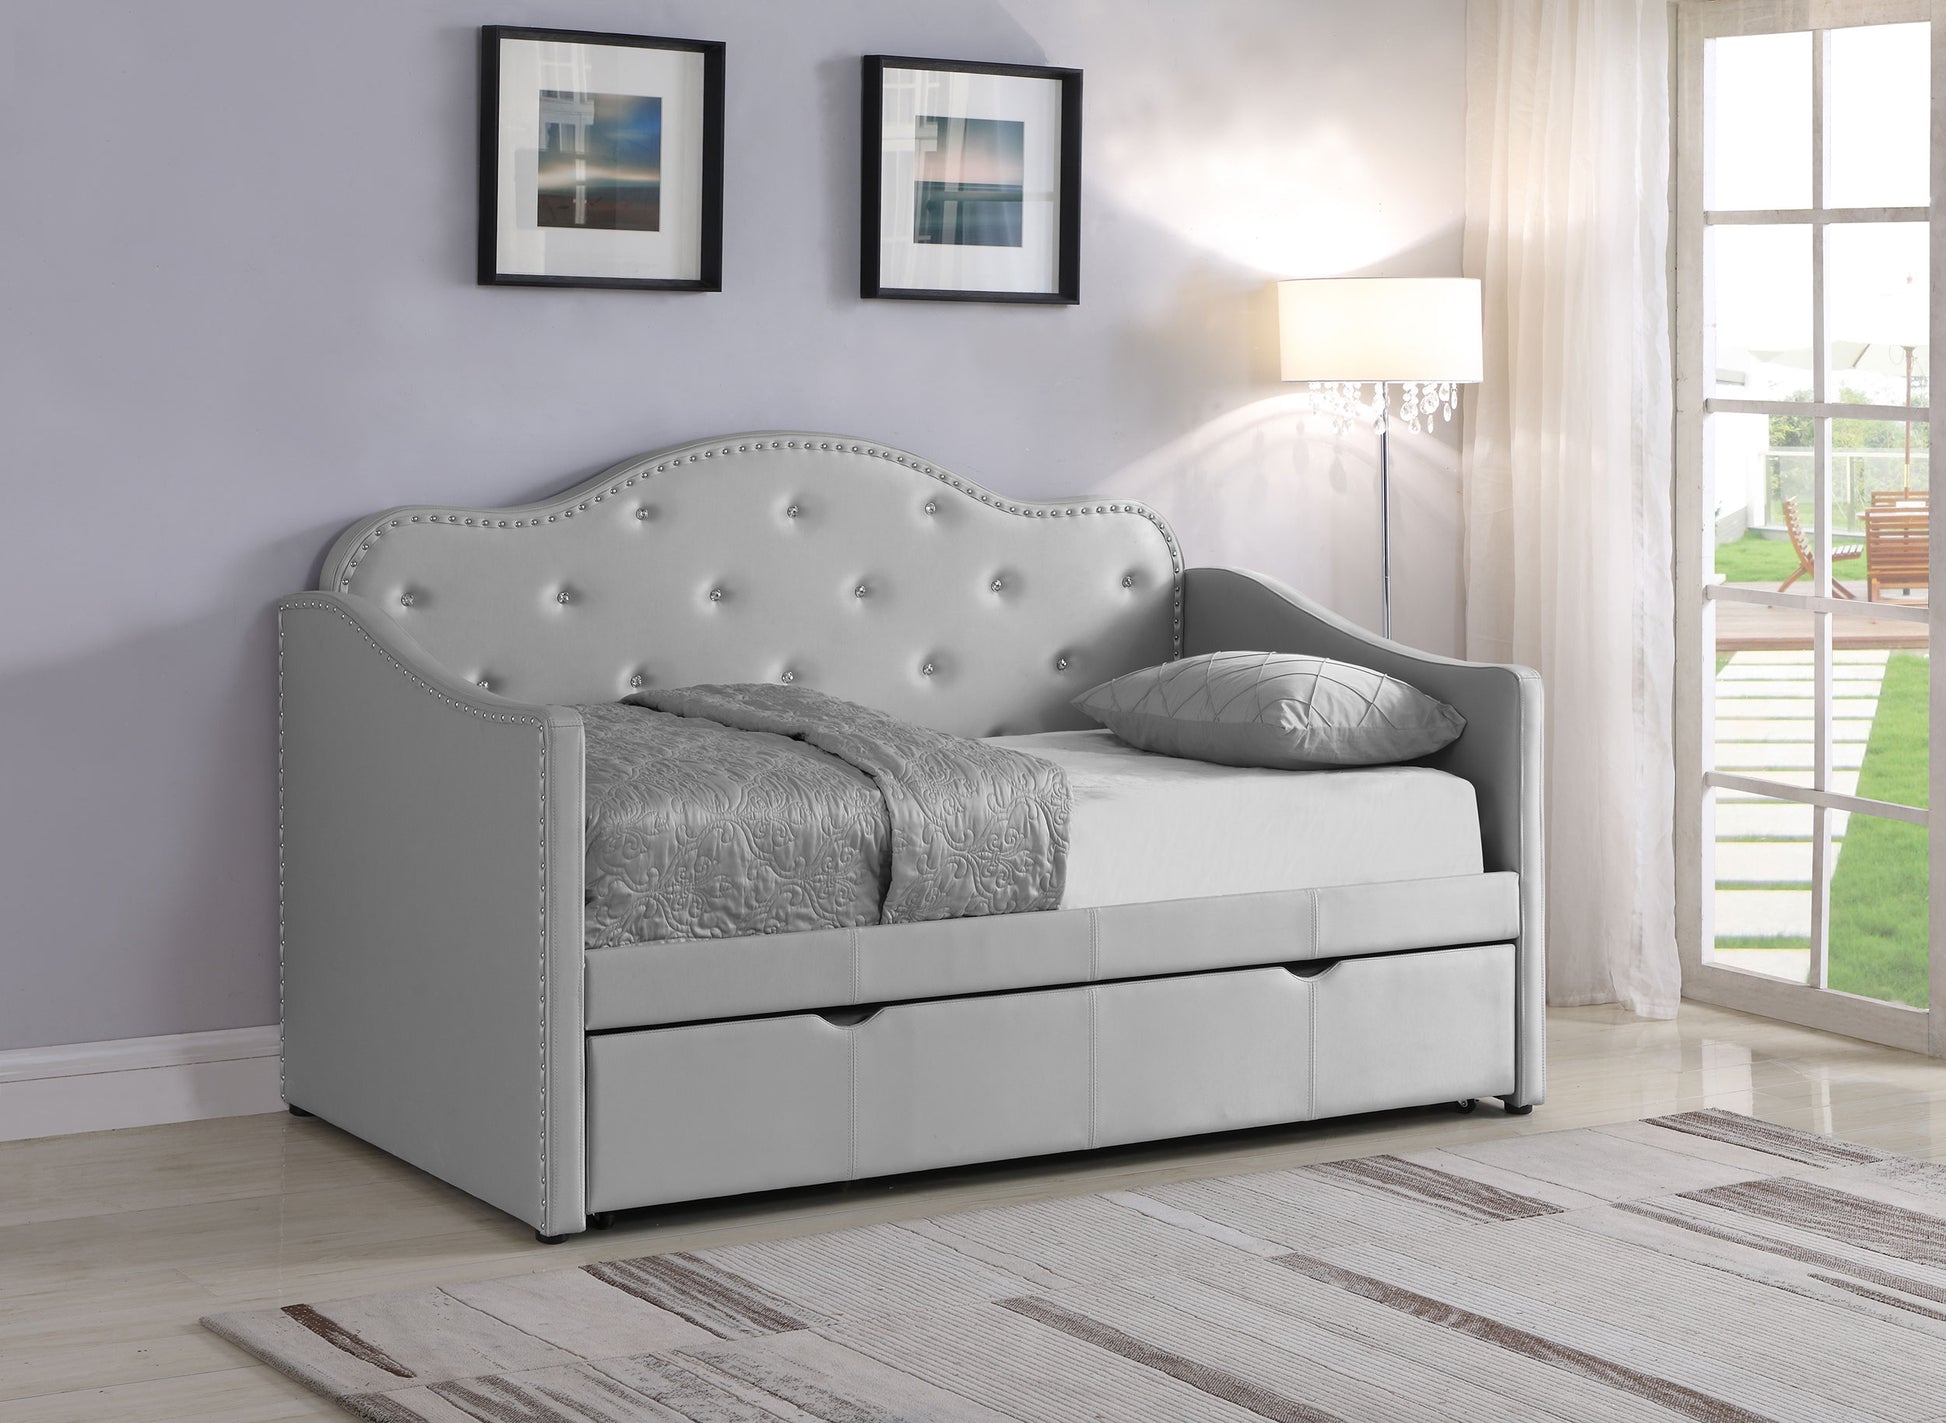 Twin Daybed W/ Trundle